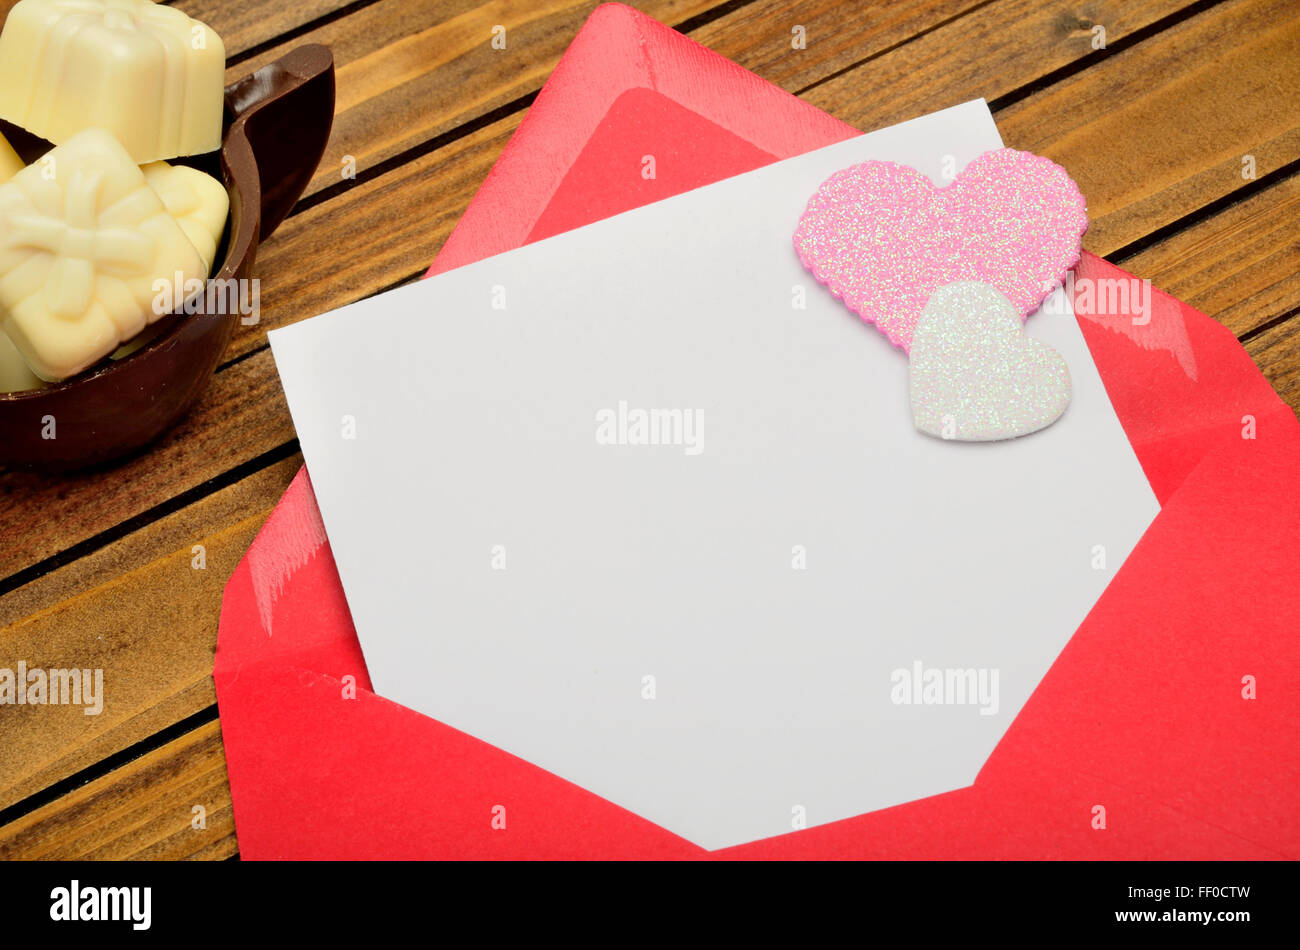 Red envelope with empty paper and chocolate gift on table Stock Photo